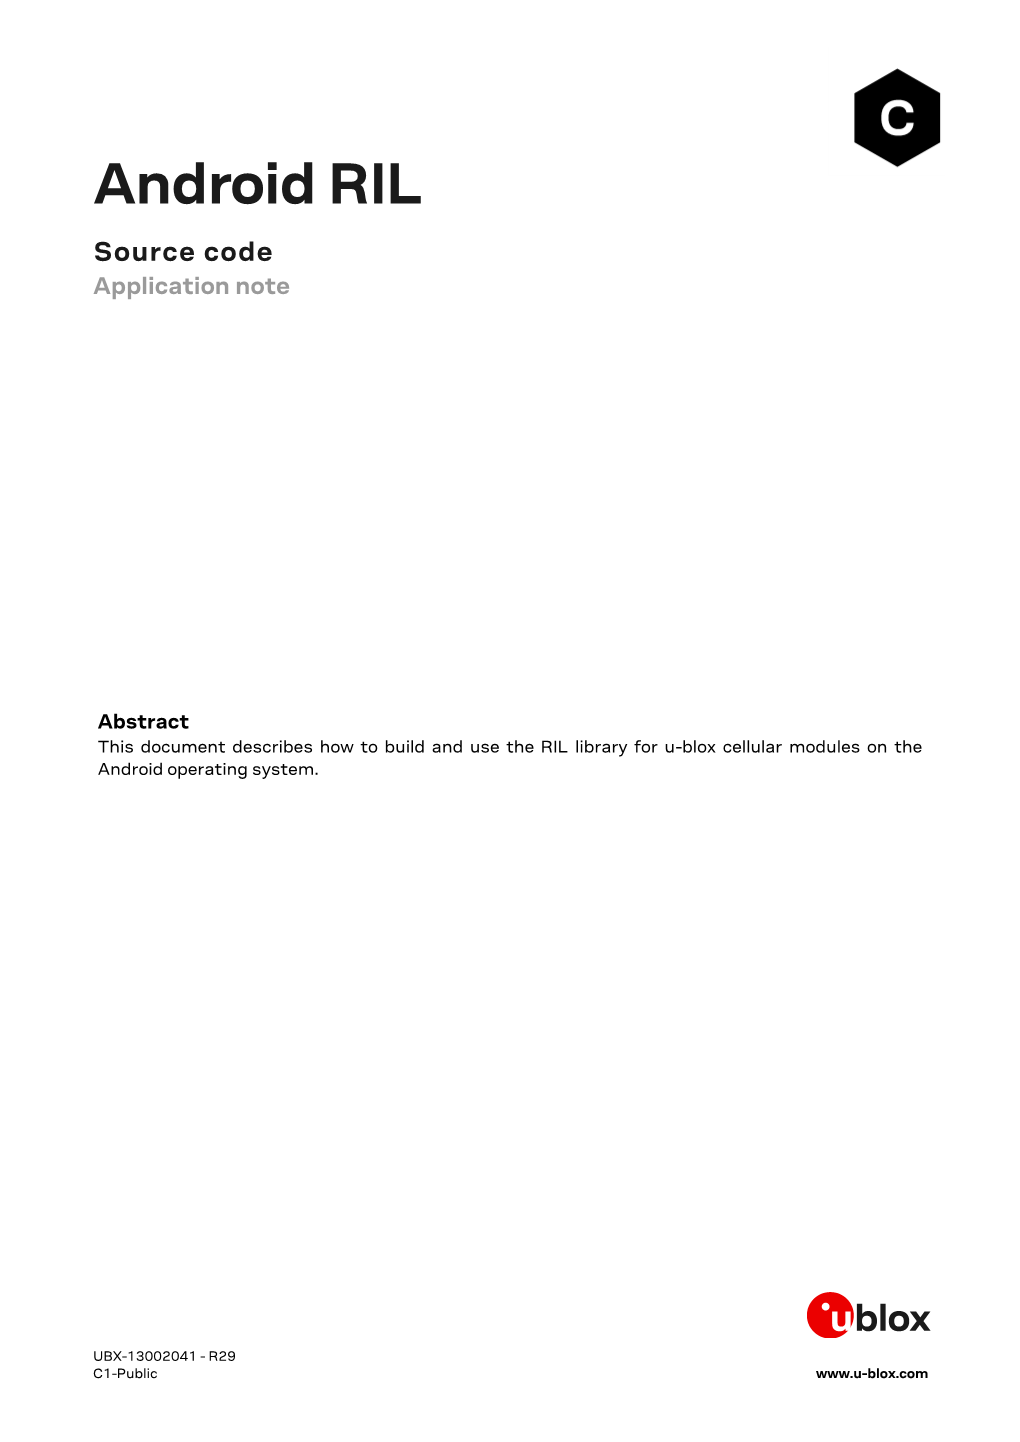 Android RIL Source Code Application Note